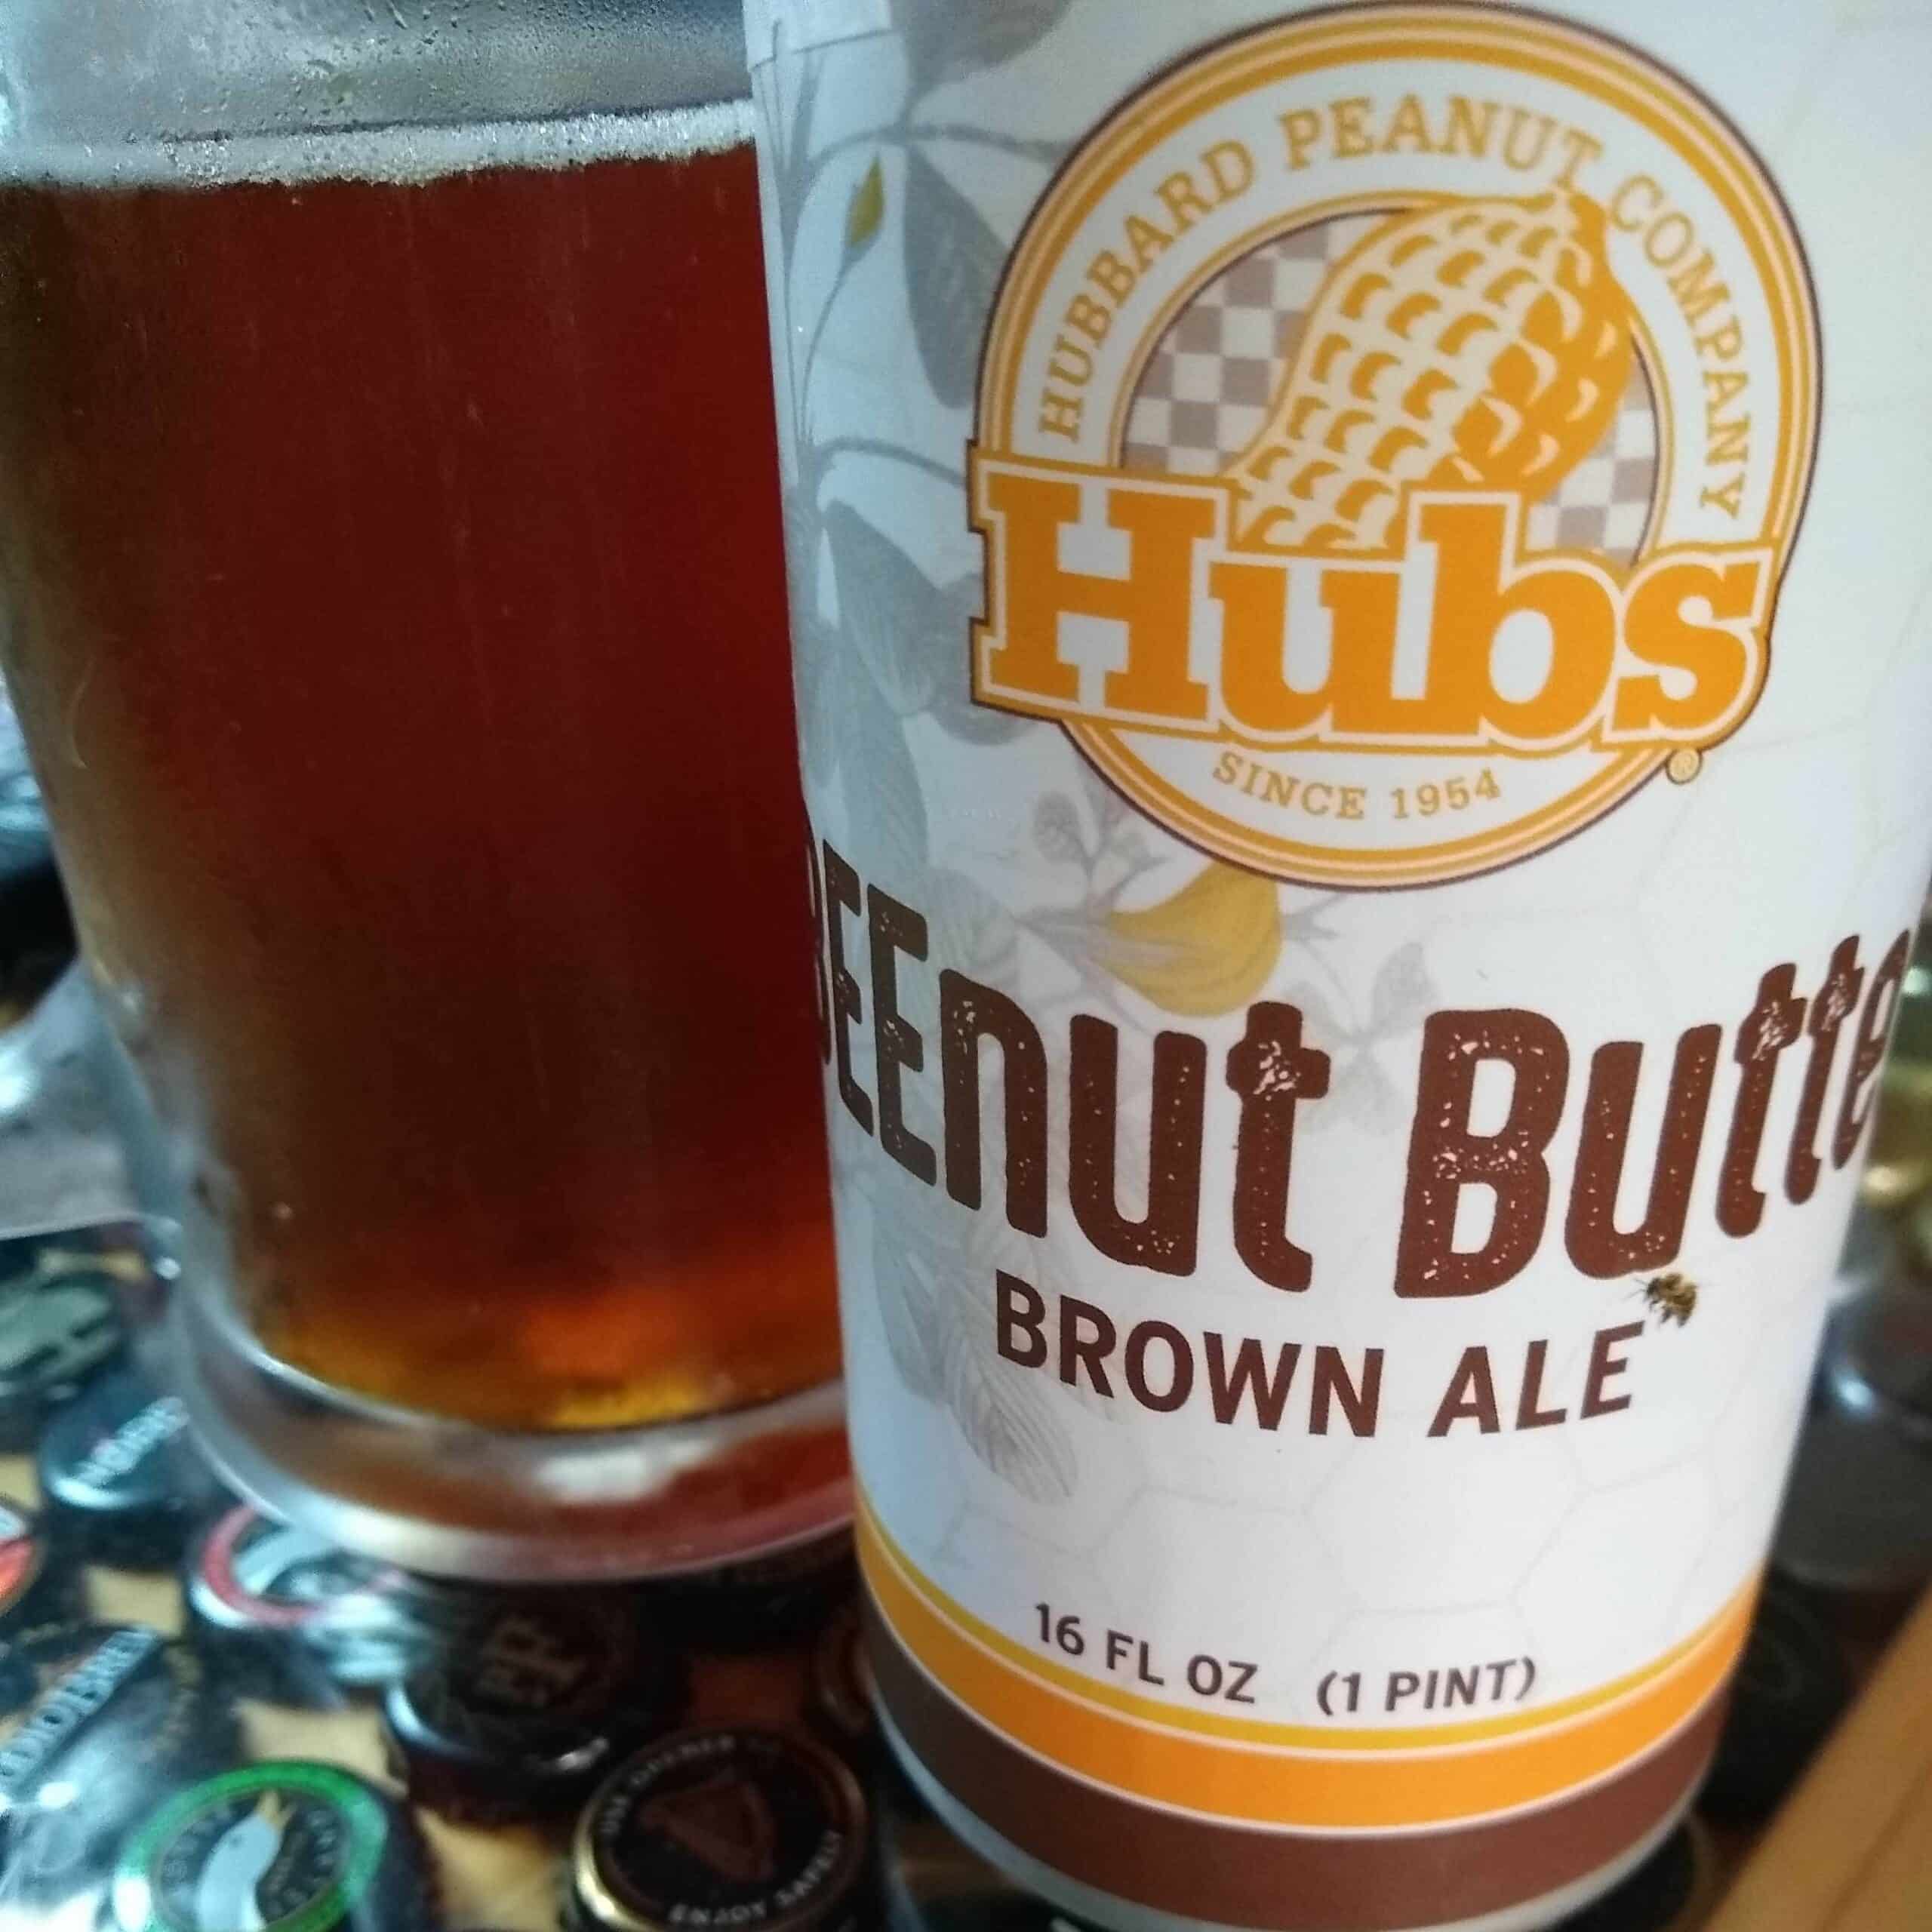 BEEnut Butter Brown Ale